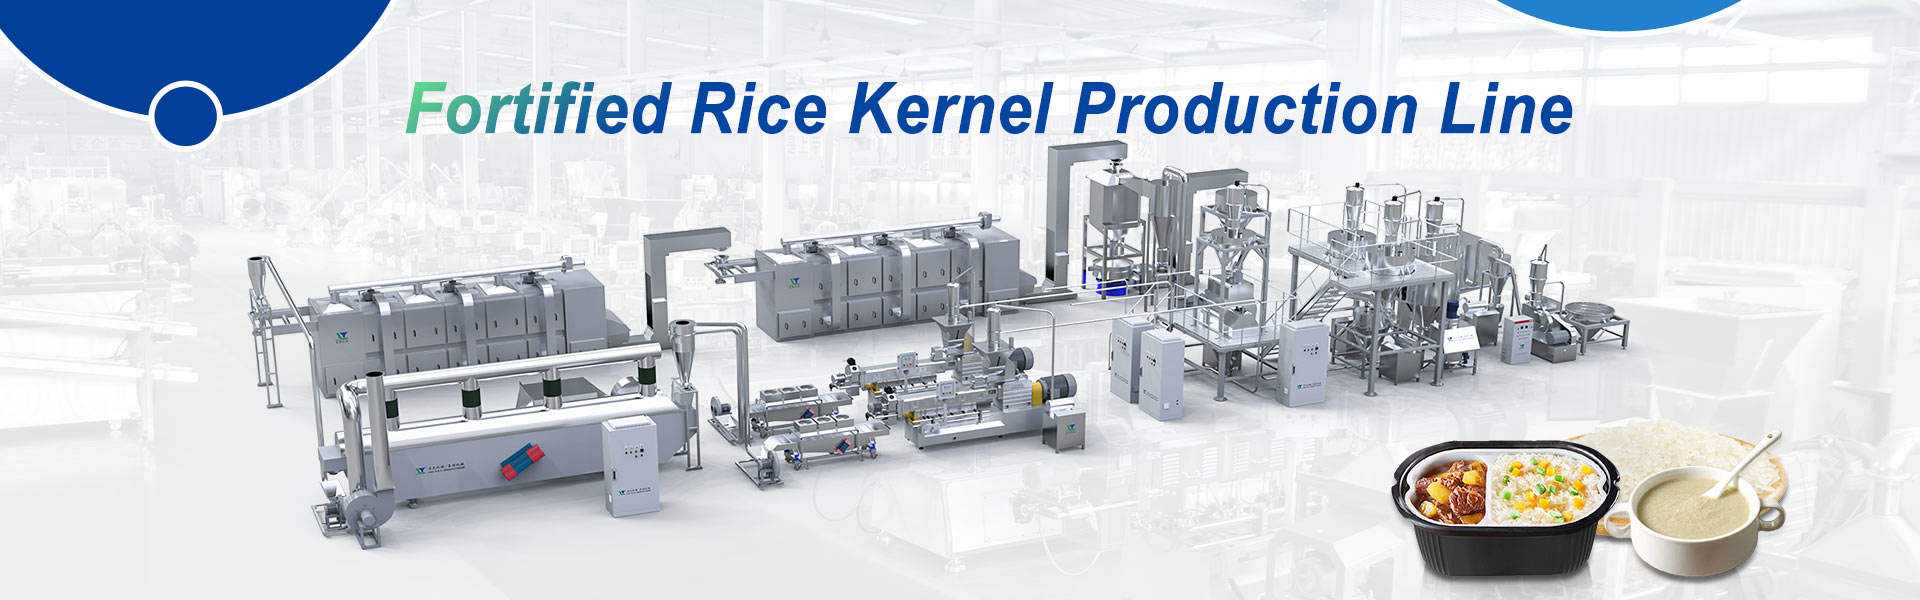 Fortified-Rice-Kernel-Production-Line